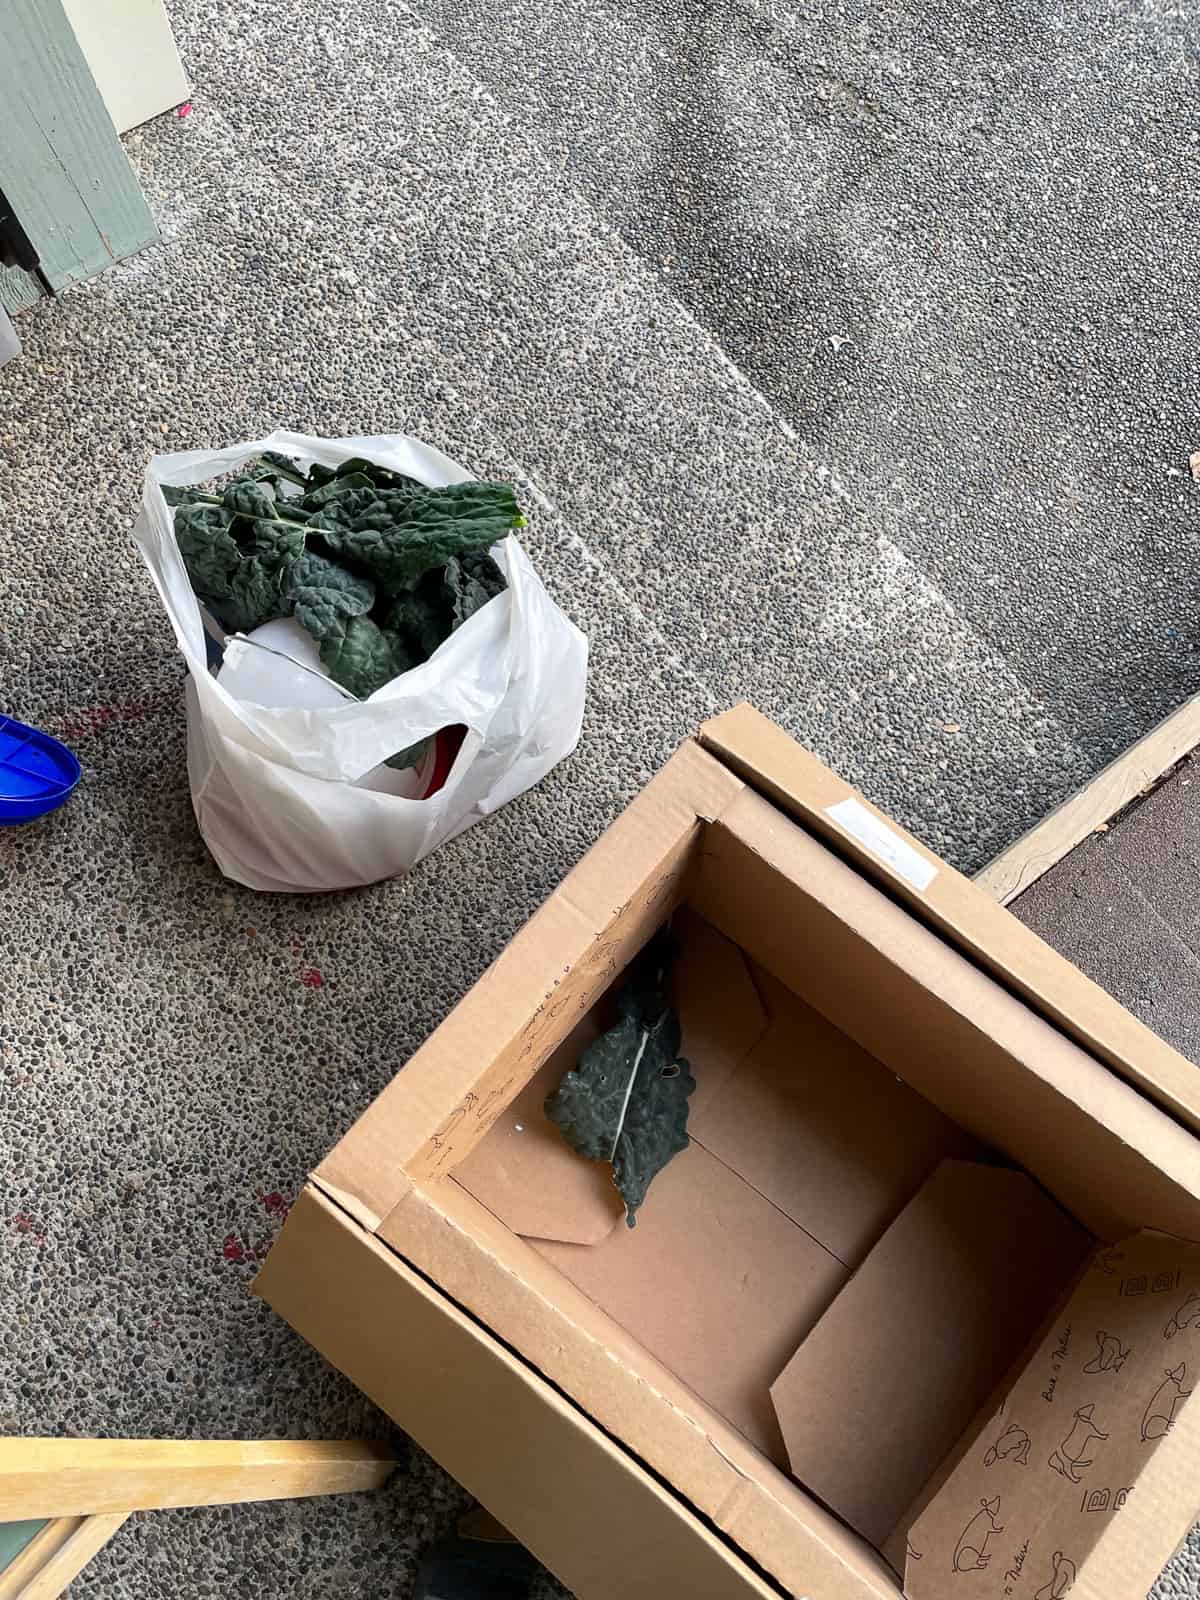 a bag of kale and a cardboard box